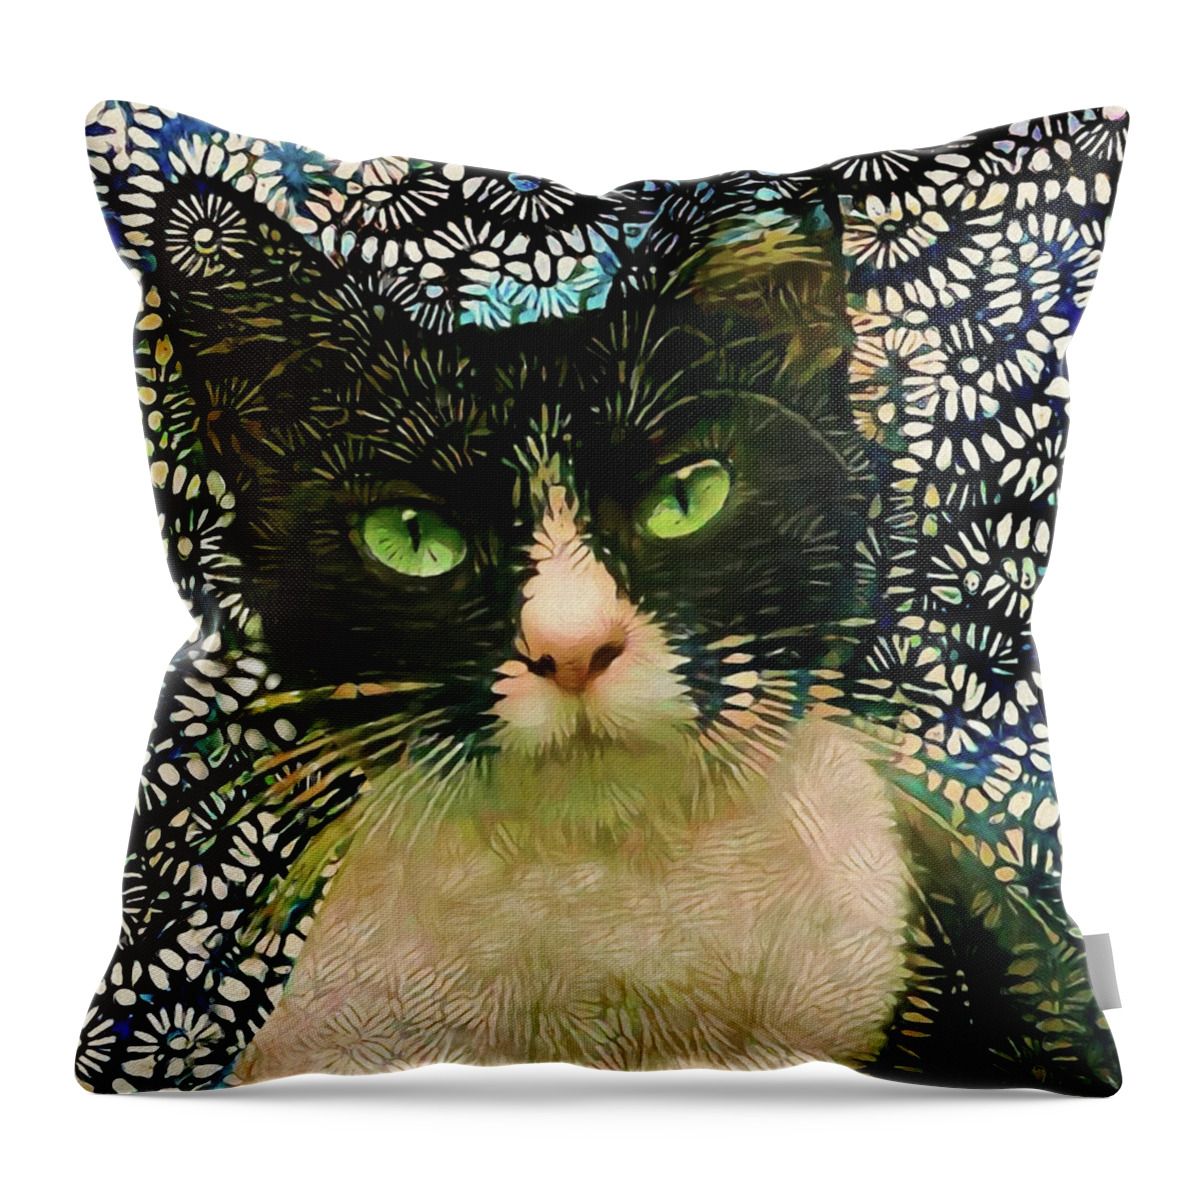 Tuxedo Cat Throw Pillow featuring the digital art Jax the Tuxedo Cat by Peggy Collins